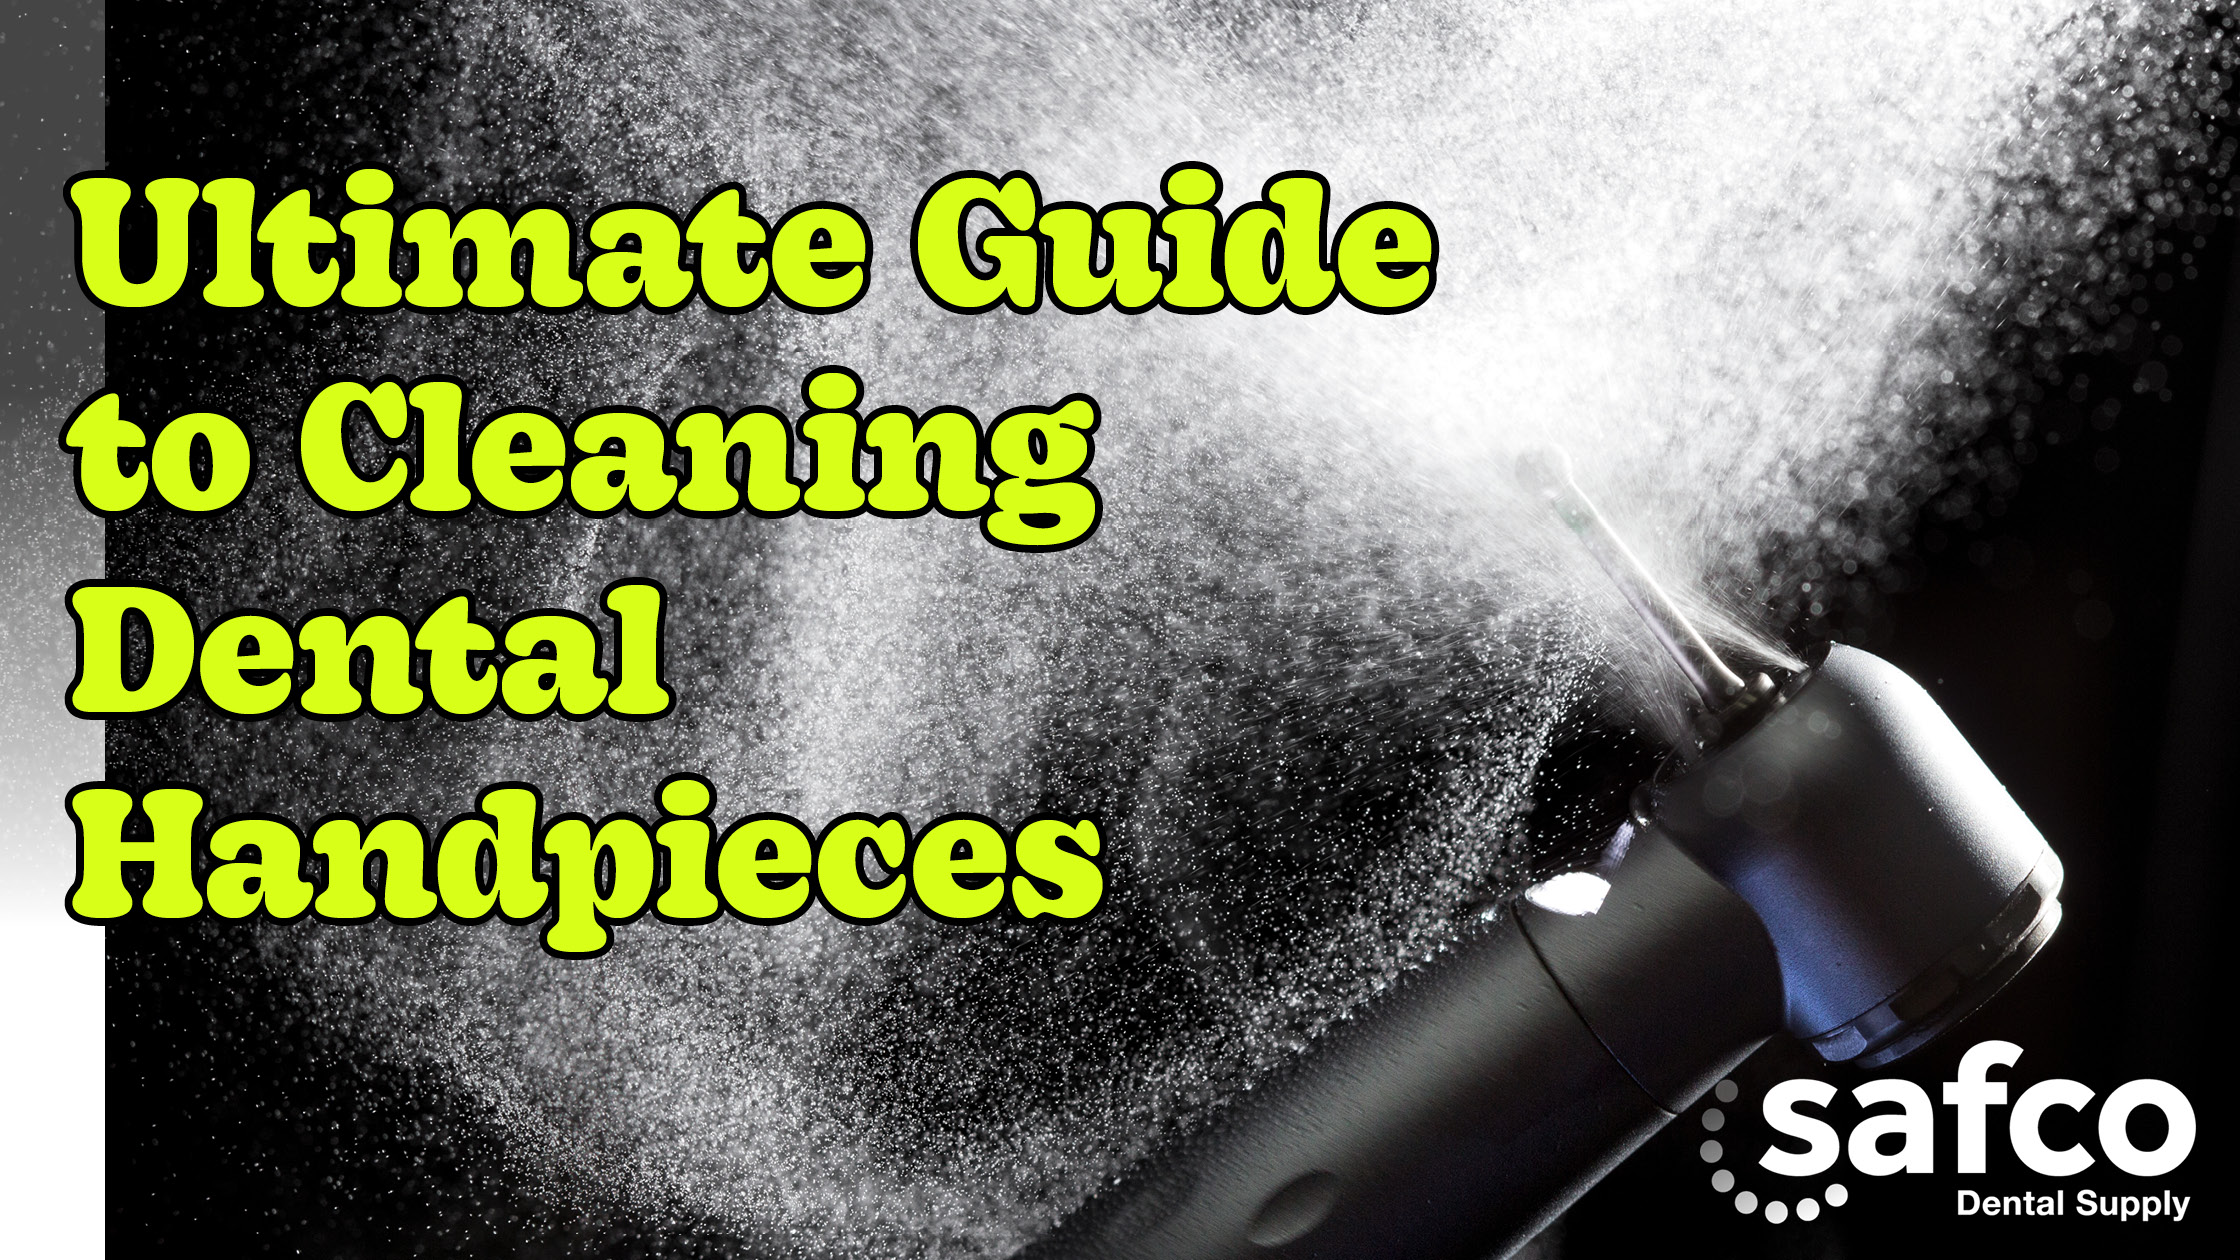 Ultimate Guide to Cleaning Dental Handpieces